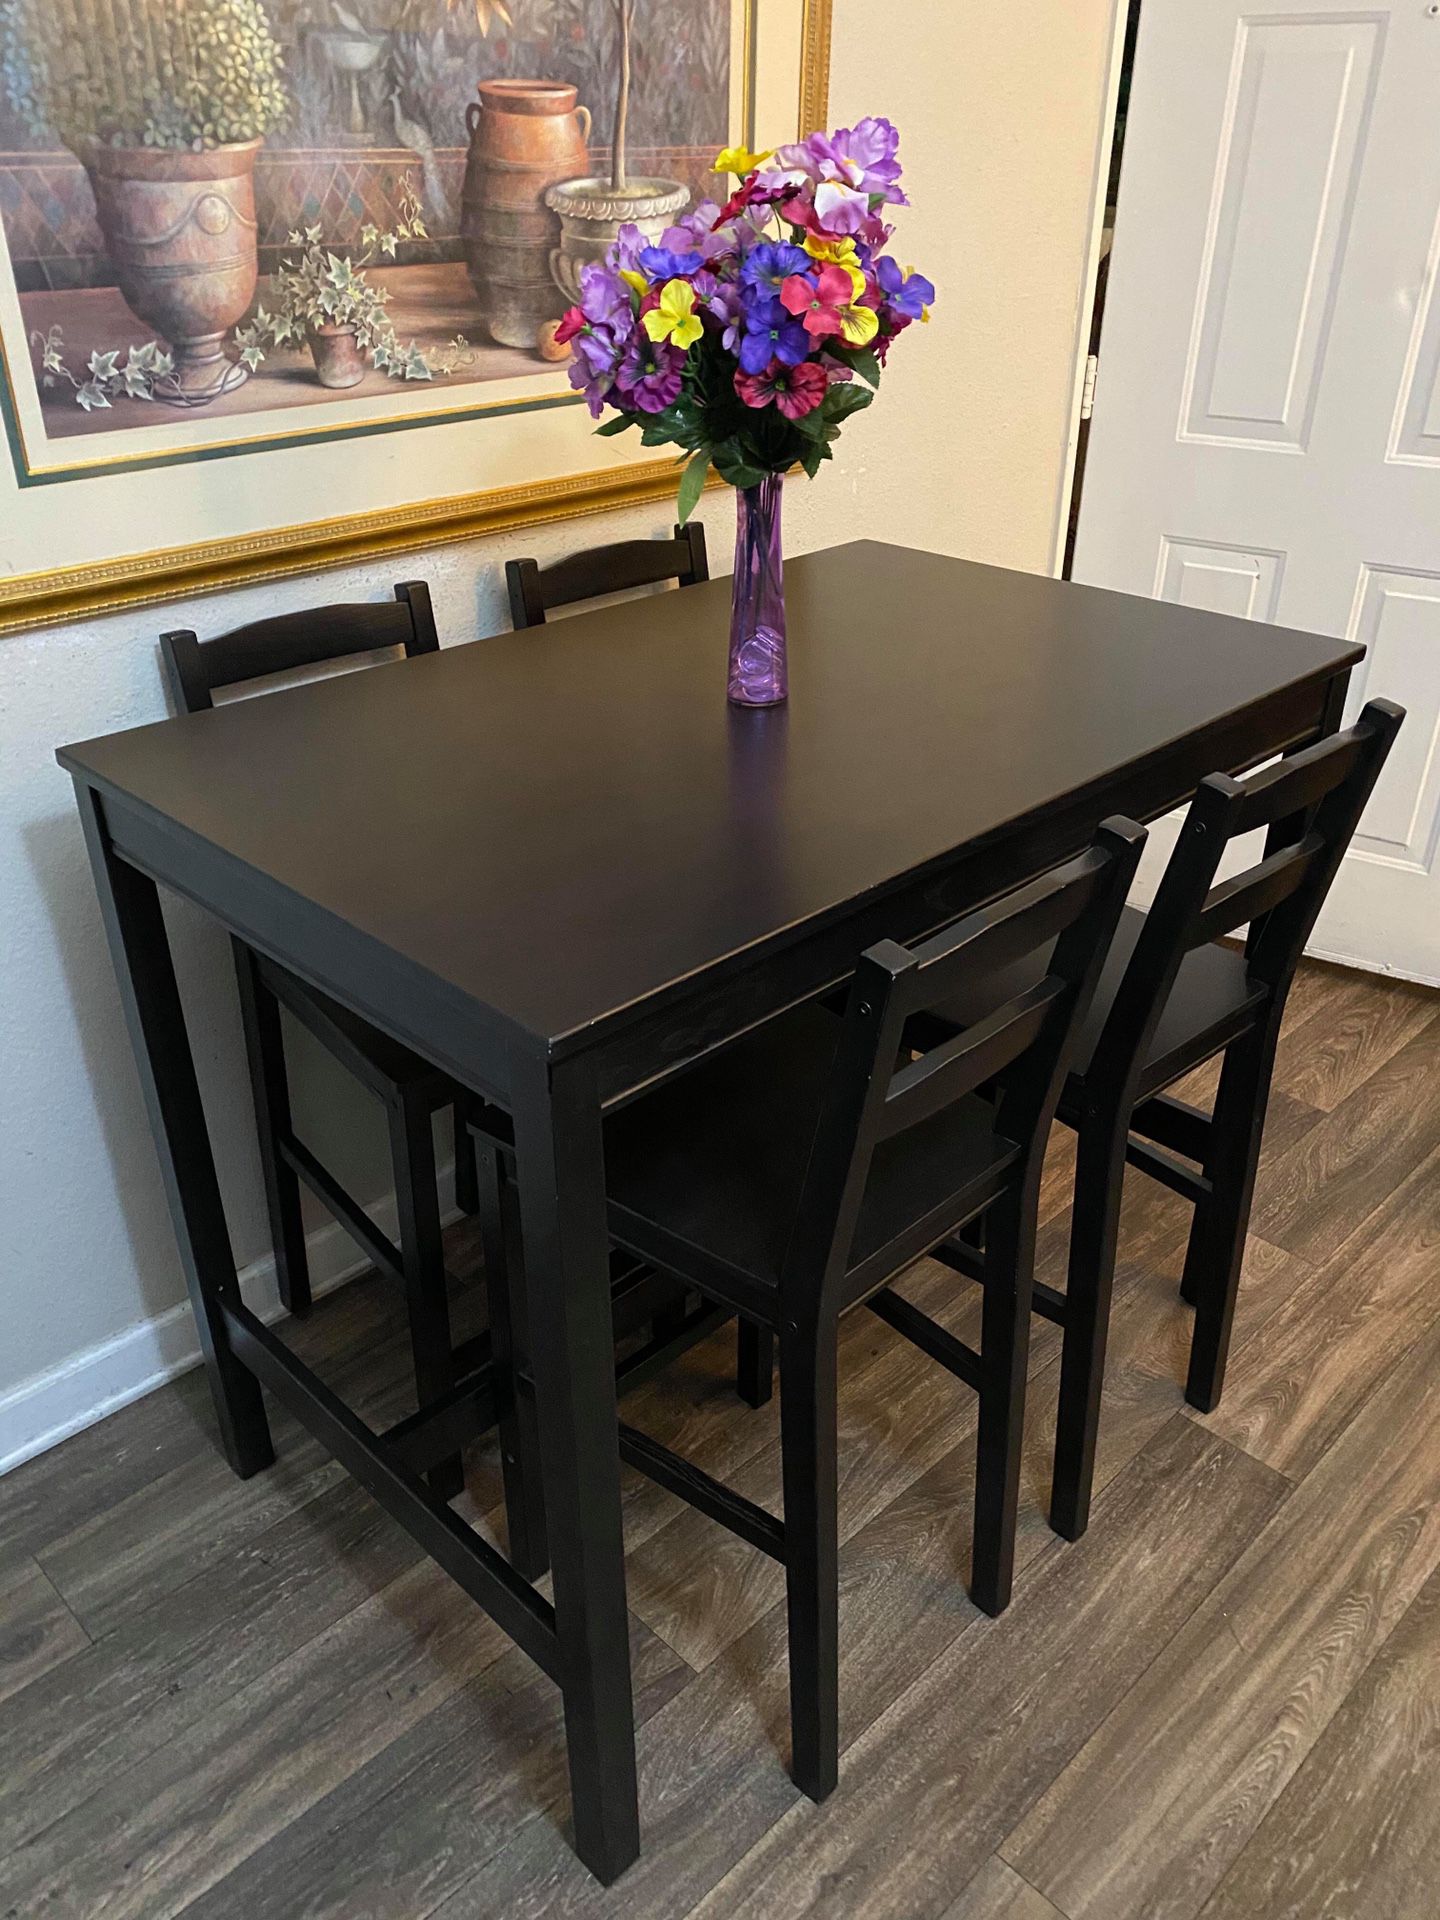 FREE DELIVERY barely used IKEA counter height dining table with 4 high chairs